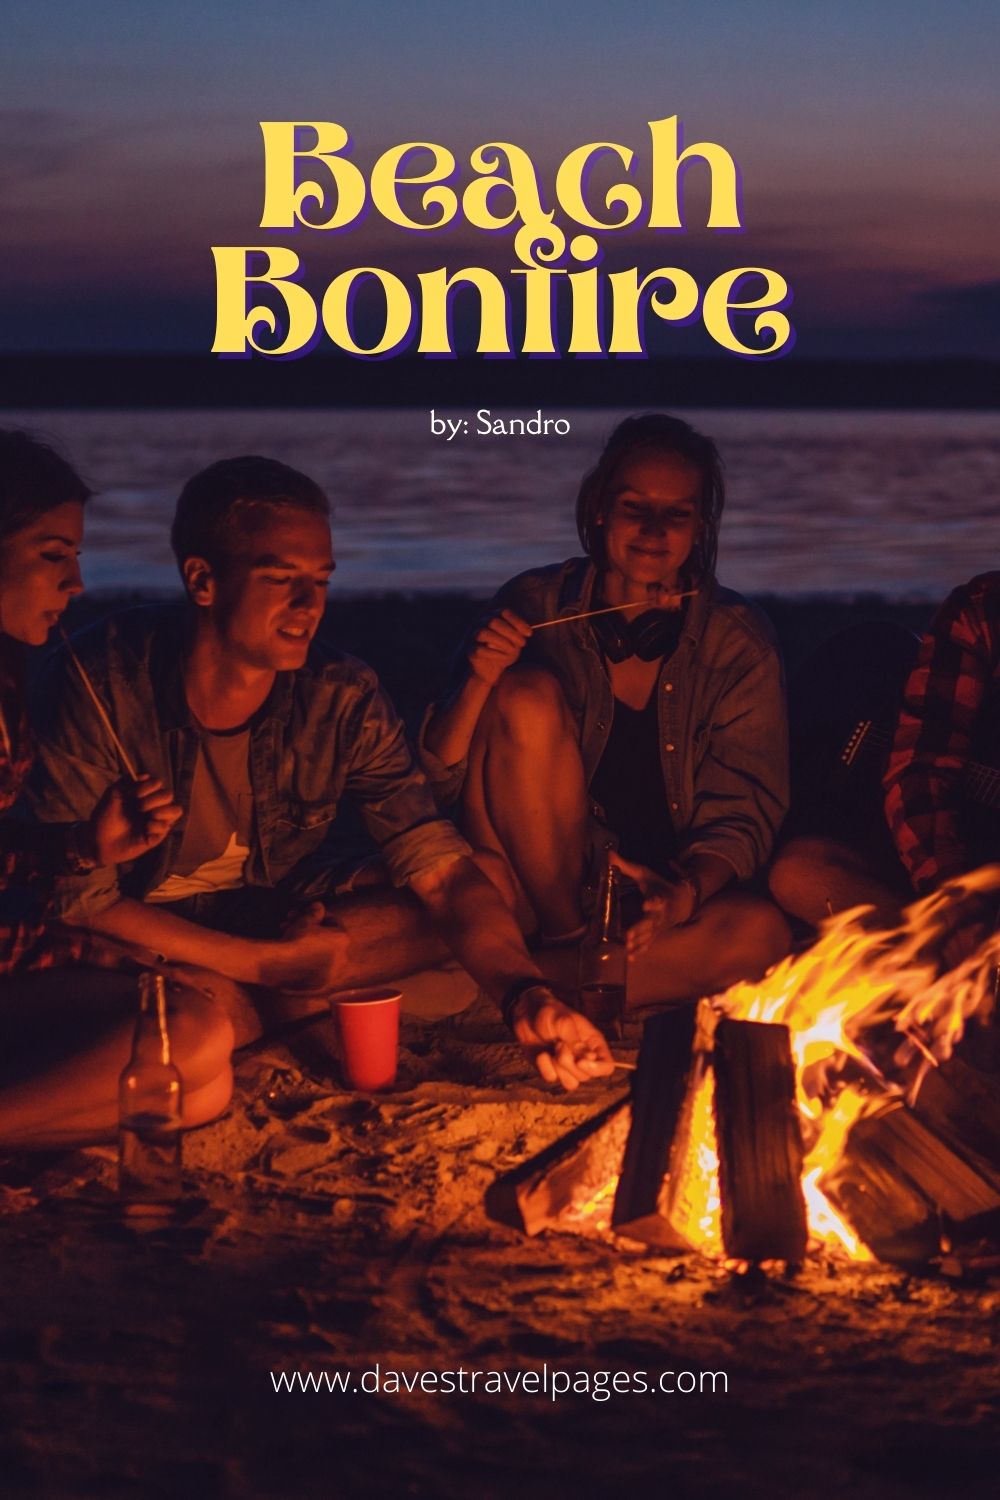 Tunes for the holidays: “Beach Bonfire” by Sandro